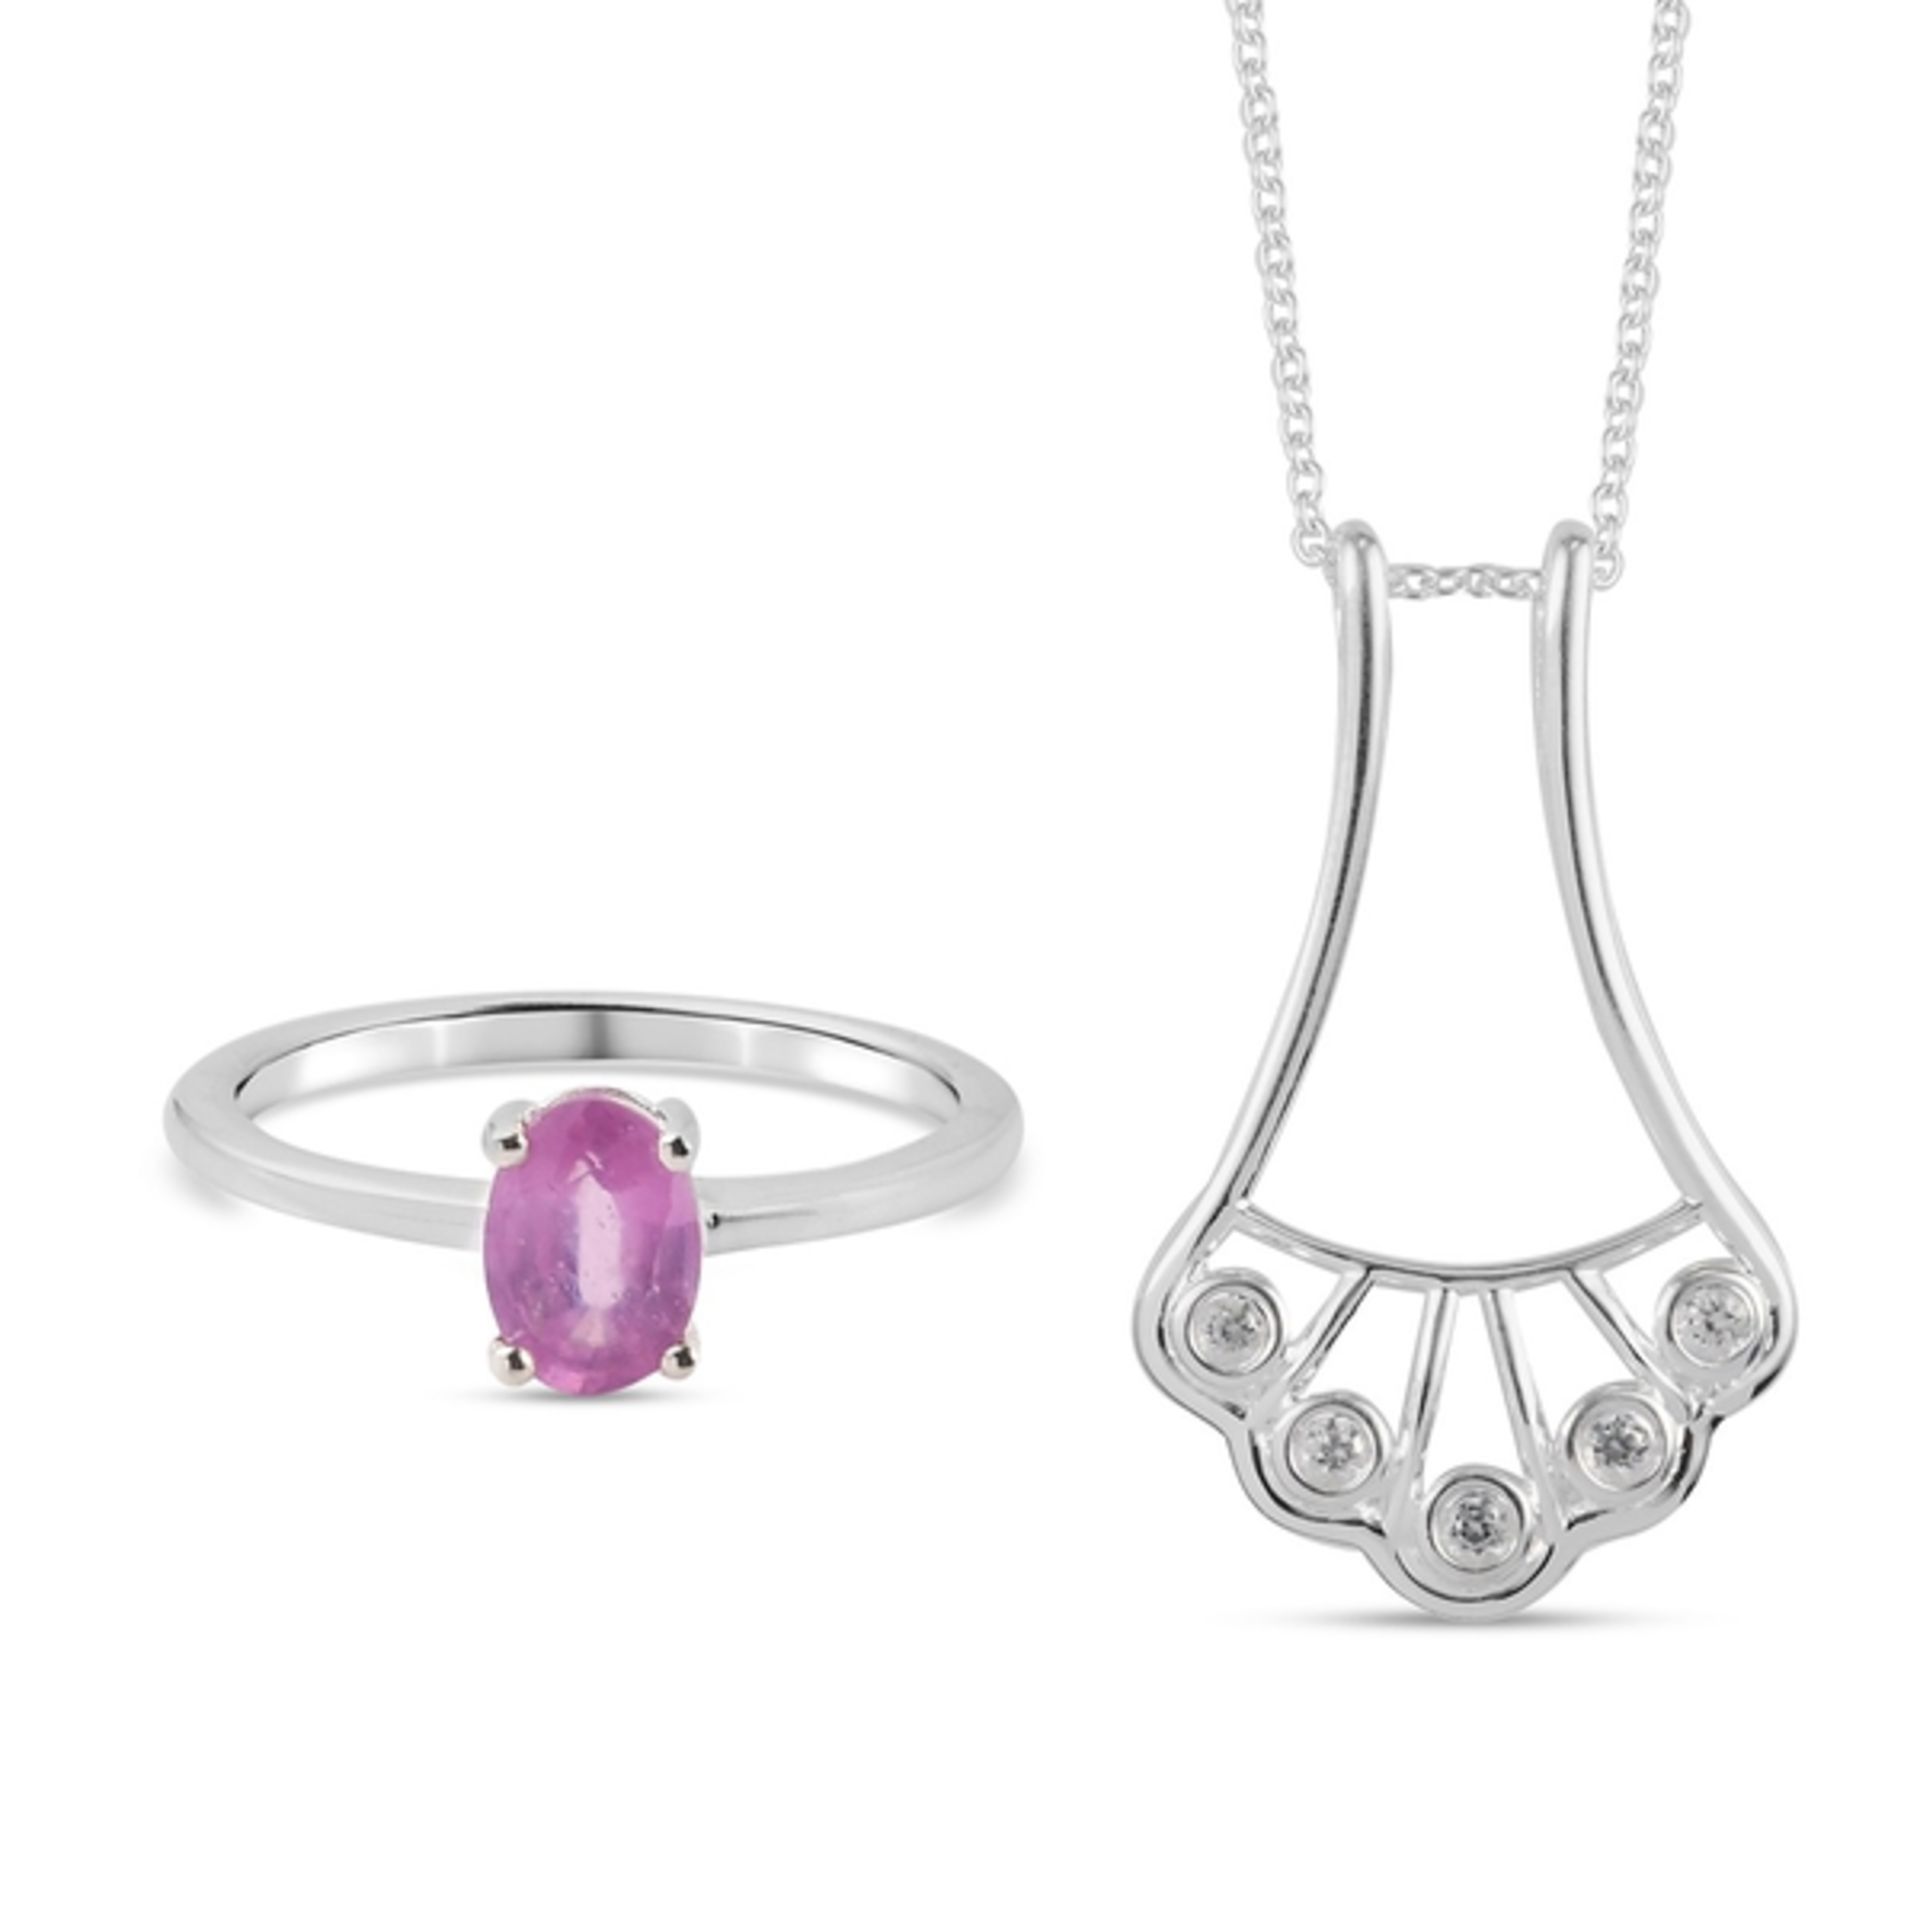 New! 2 Piece Set - Pink Sapphire and Natural Cambodian Zircon Ring and Pendant - Image 2 of 5